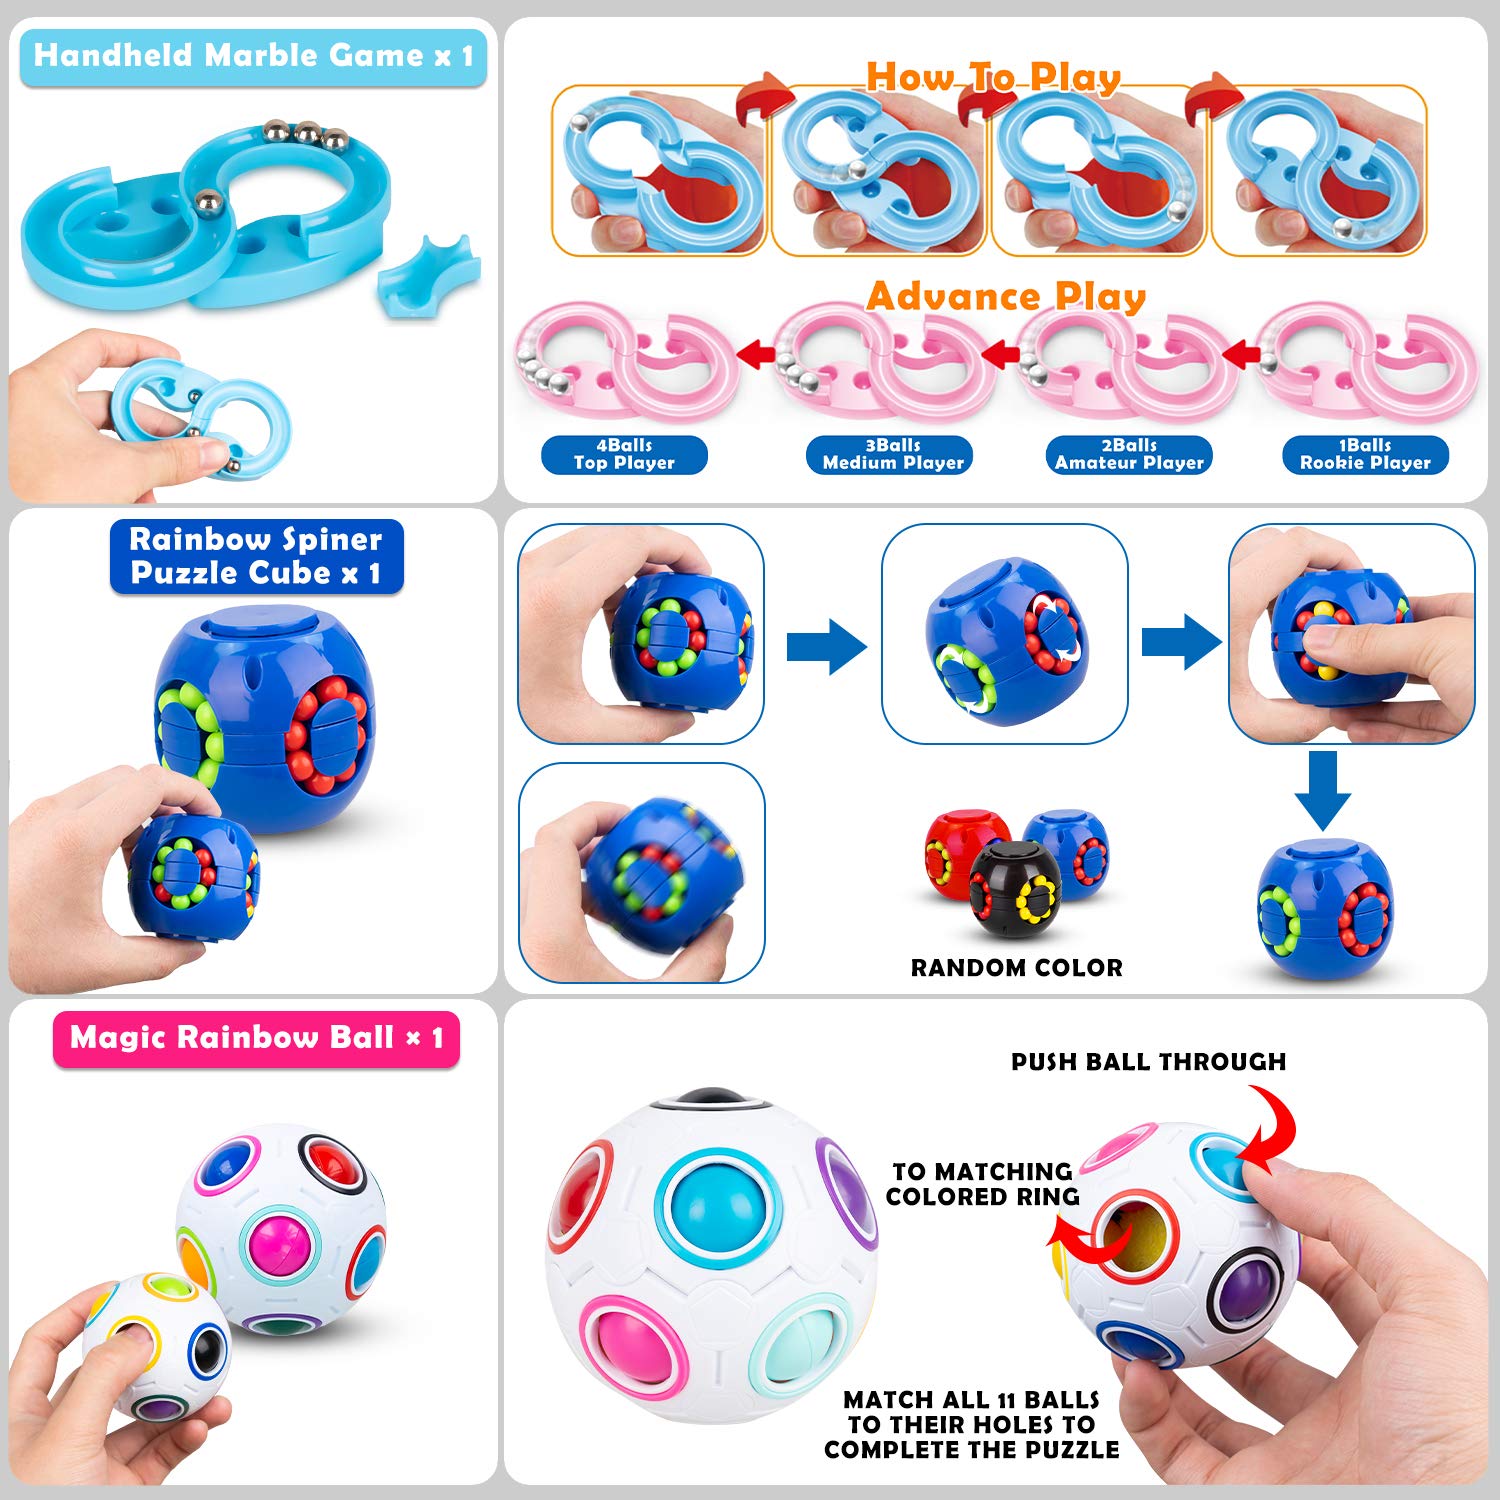 61 Pcs Sensory Fidget Toys Pack,Stress & Anxiety Relief Tools Bundle Figetget Toys Set for Kids Adults,Autistic ADHD Toys,Stress Balls Fidget Spinner Marble Mesh Puzzle Ball Pop Tube Fidget Box